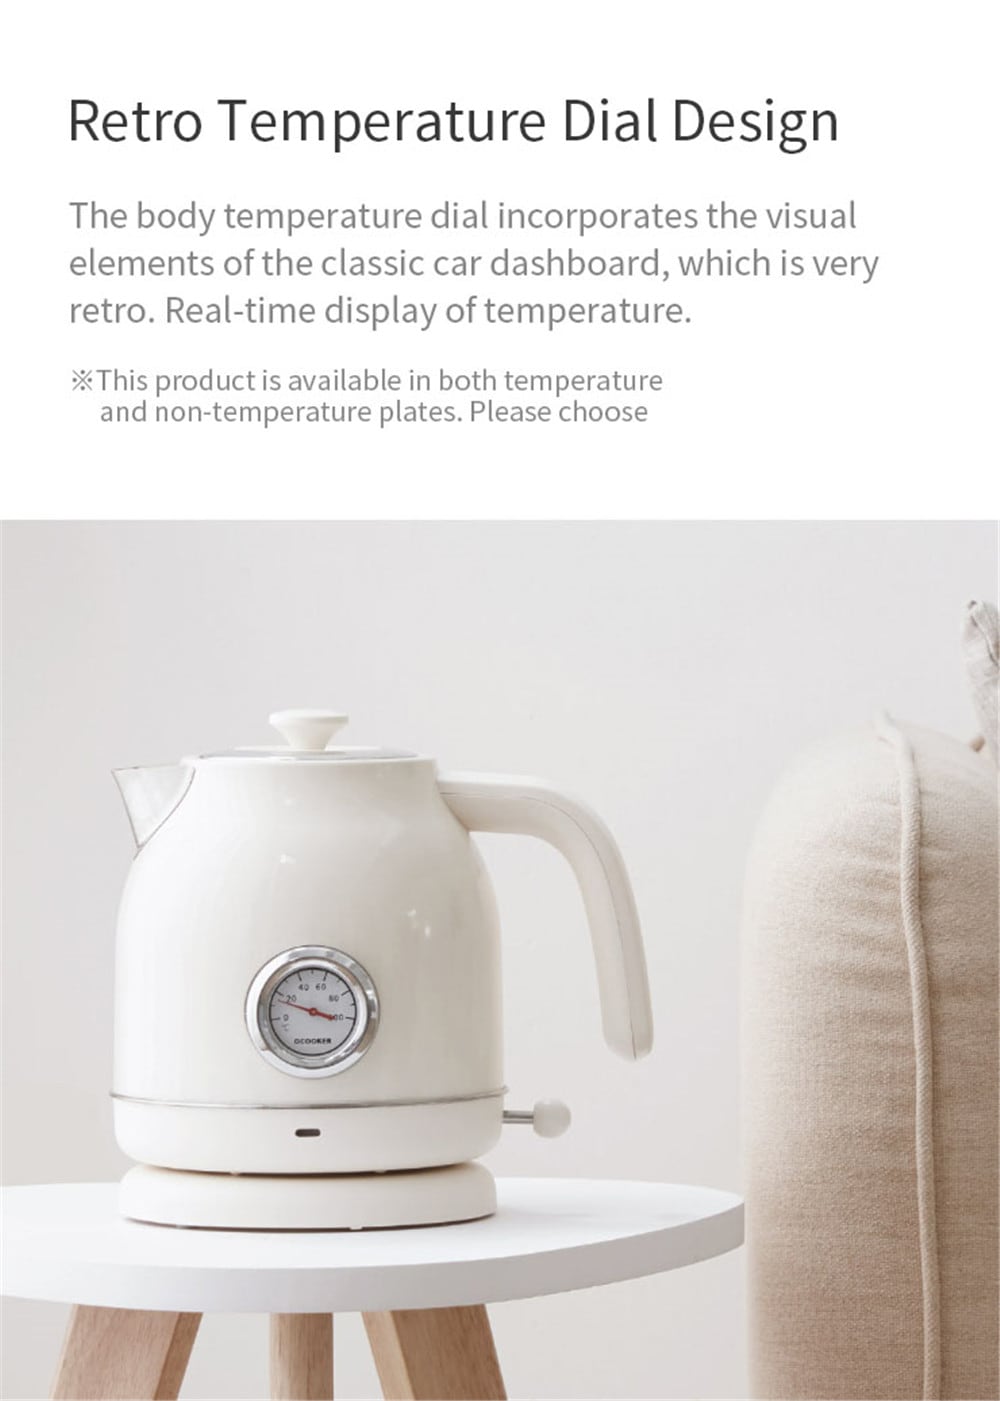 QCOOKER 1.7L / 1800W Retro Electric Kettle with Watch Thermometer Display from Xiaomi- Hazel Green